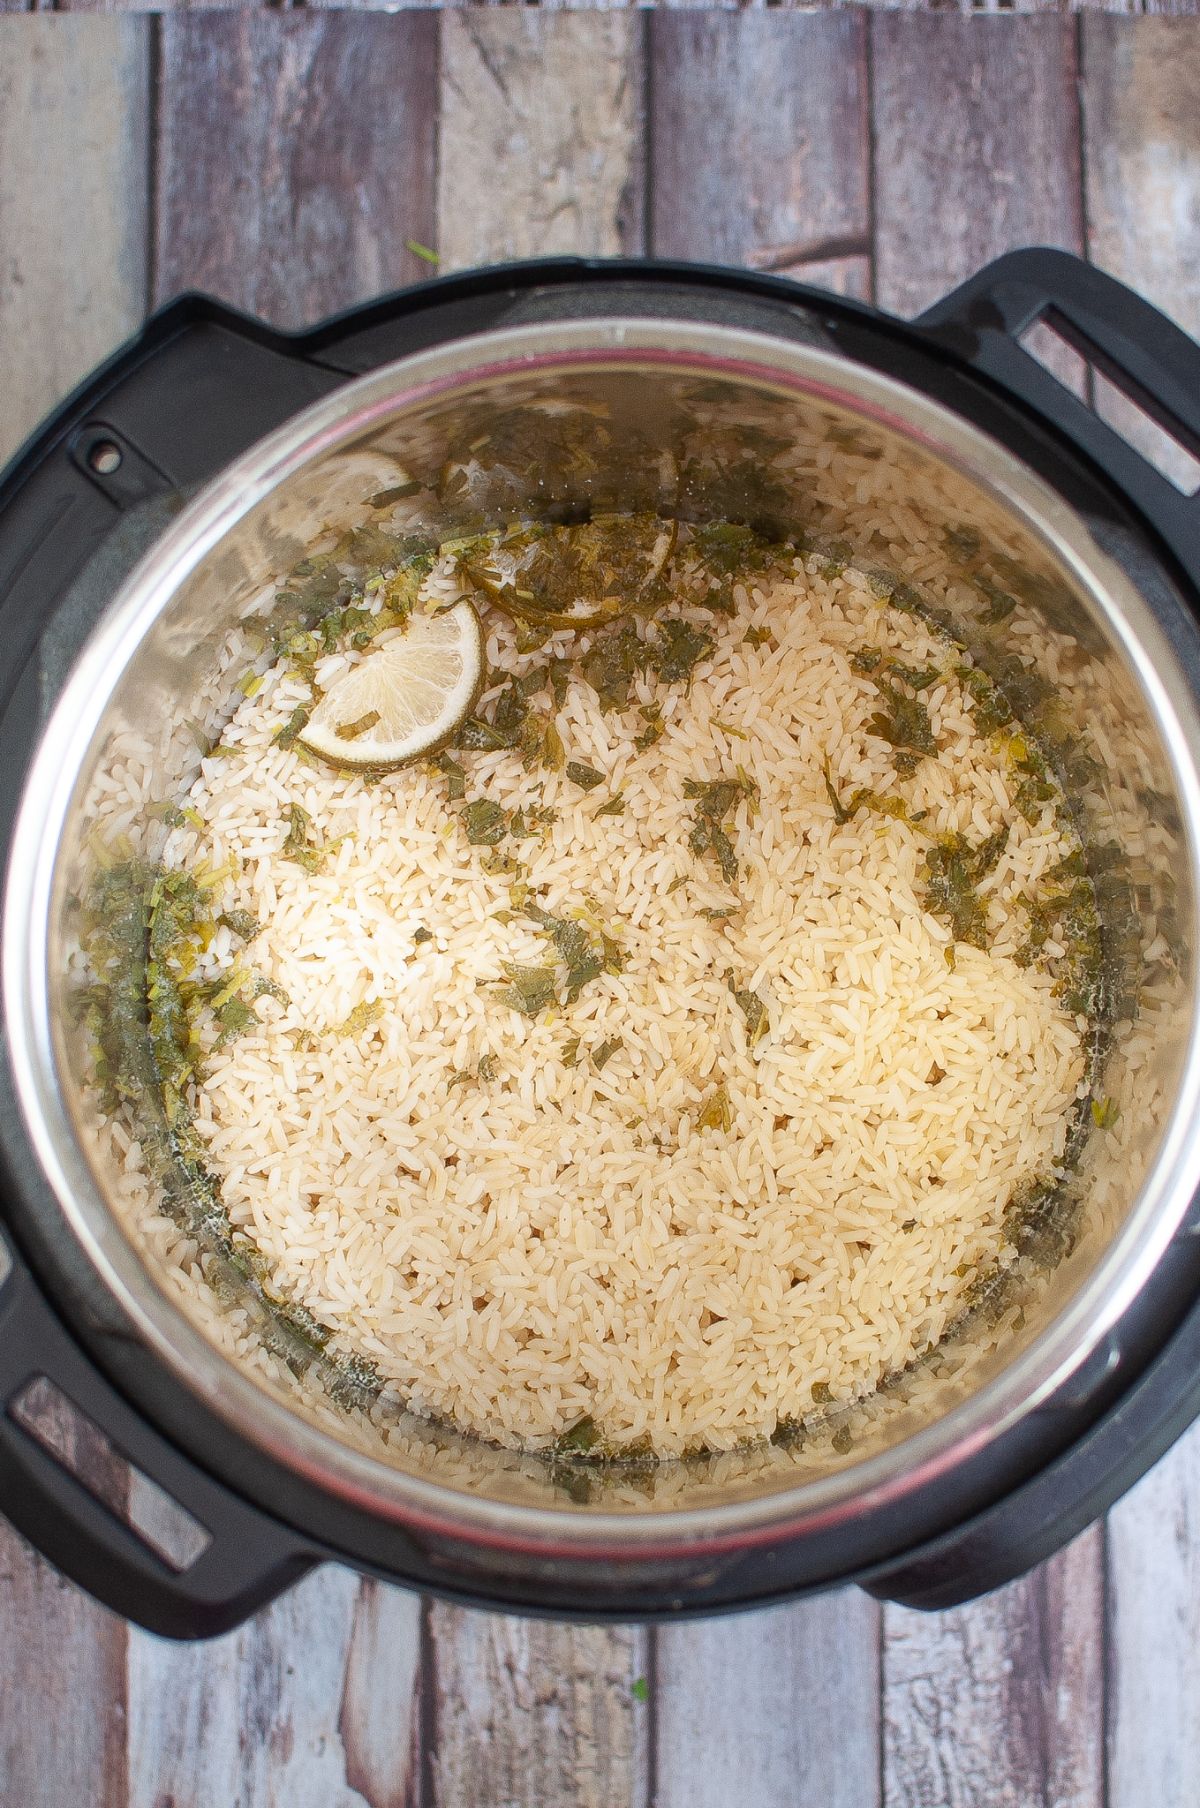 Cooked rice pilaf in an instant pot on a wooden table.